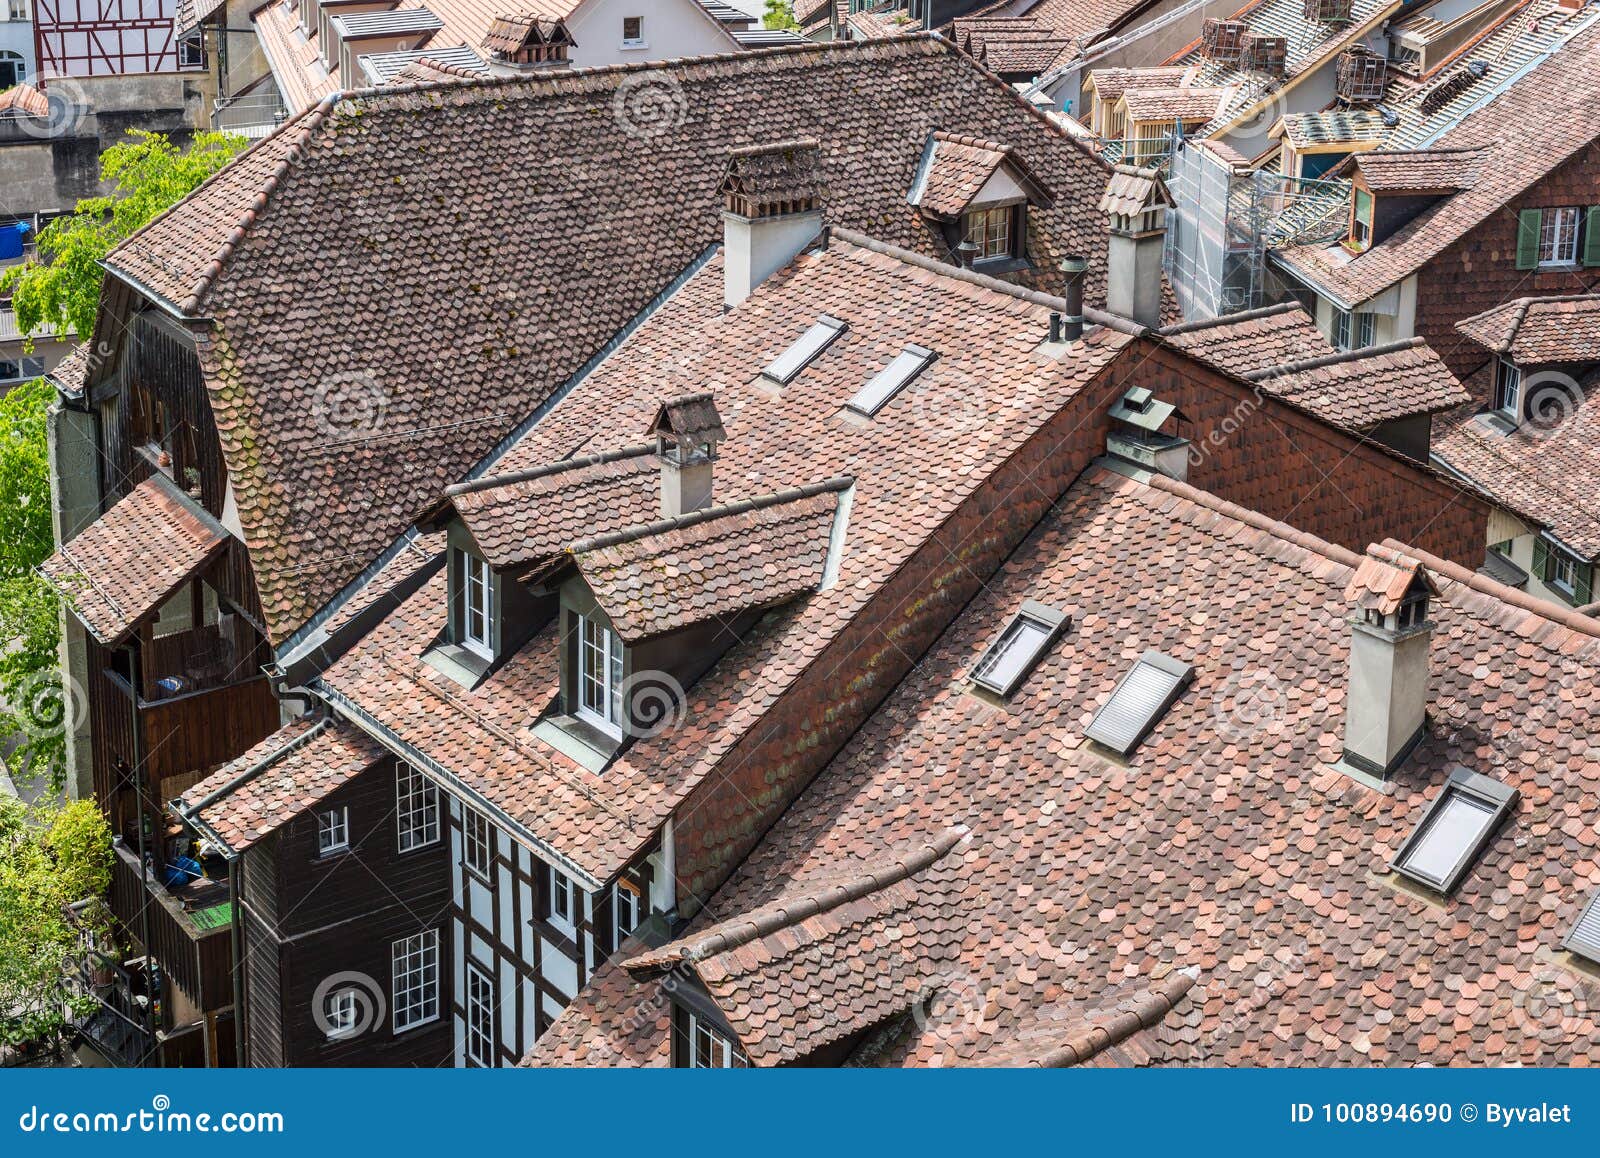 Medieval Tiled Roof. Old Tiling Texture. Editorial Image - Image of